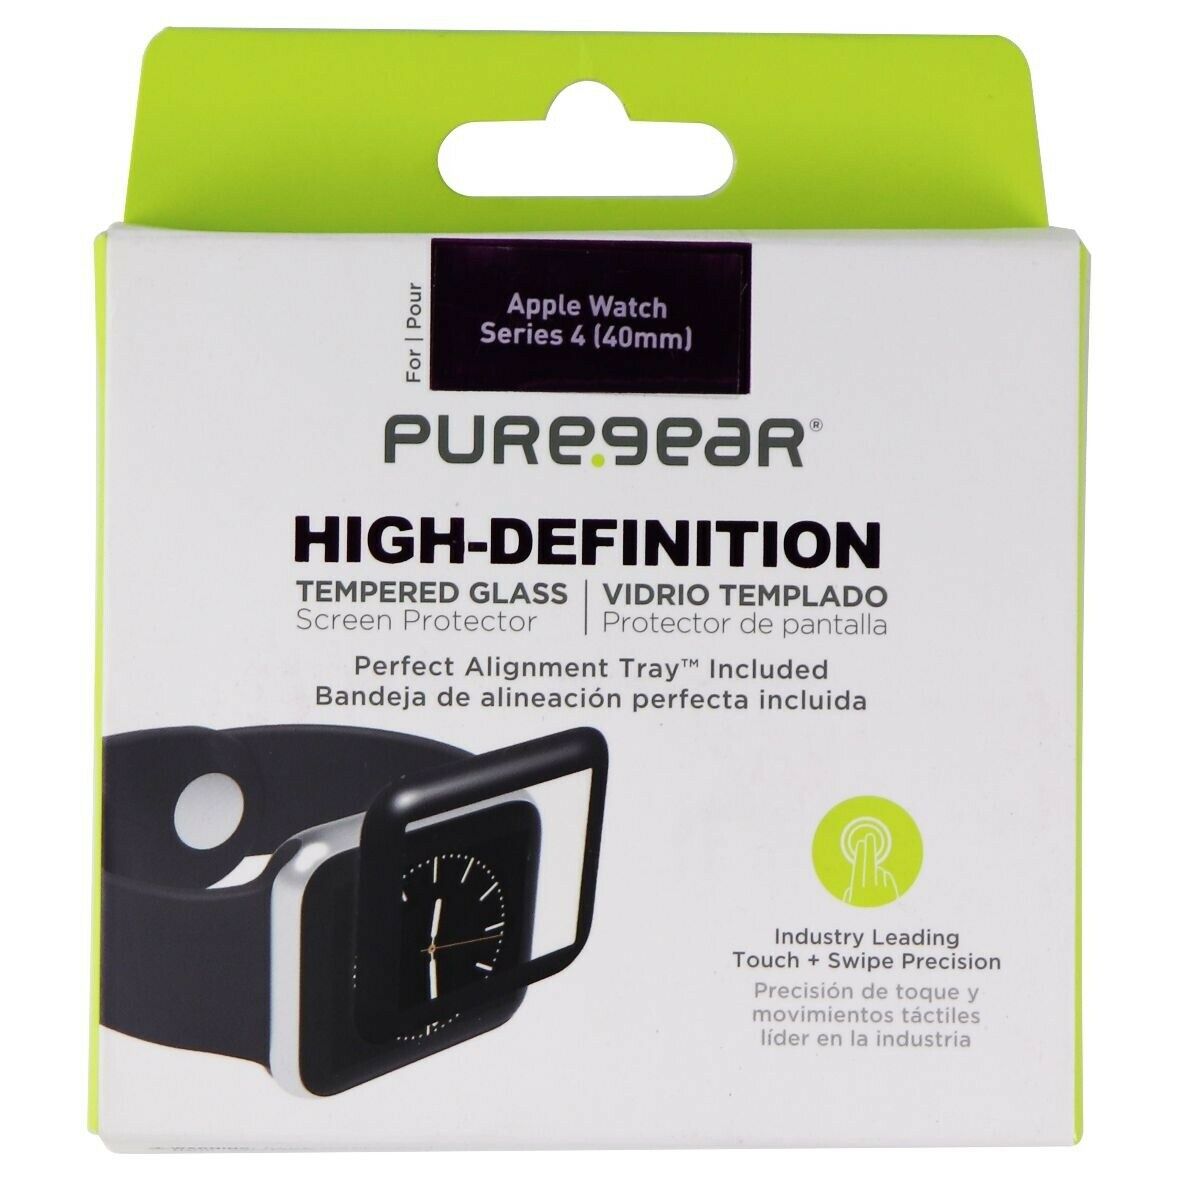 Puregear Hd Tempered Glass Screen Protector For Apple Watch Series 6/se/5/4 40mm